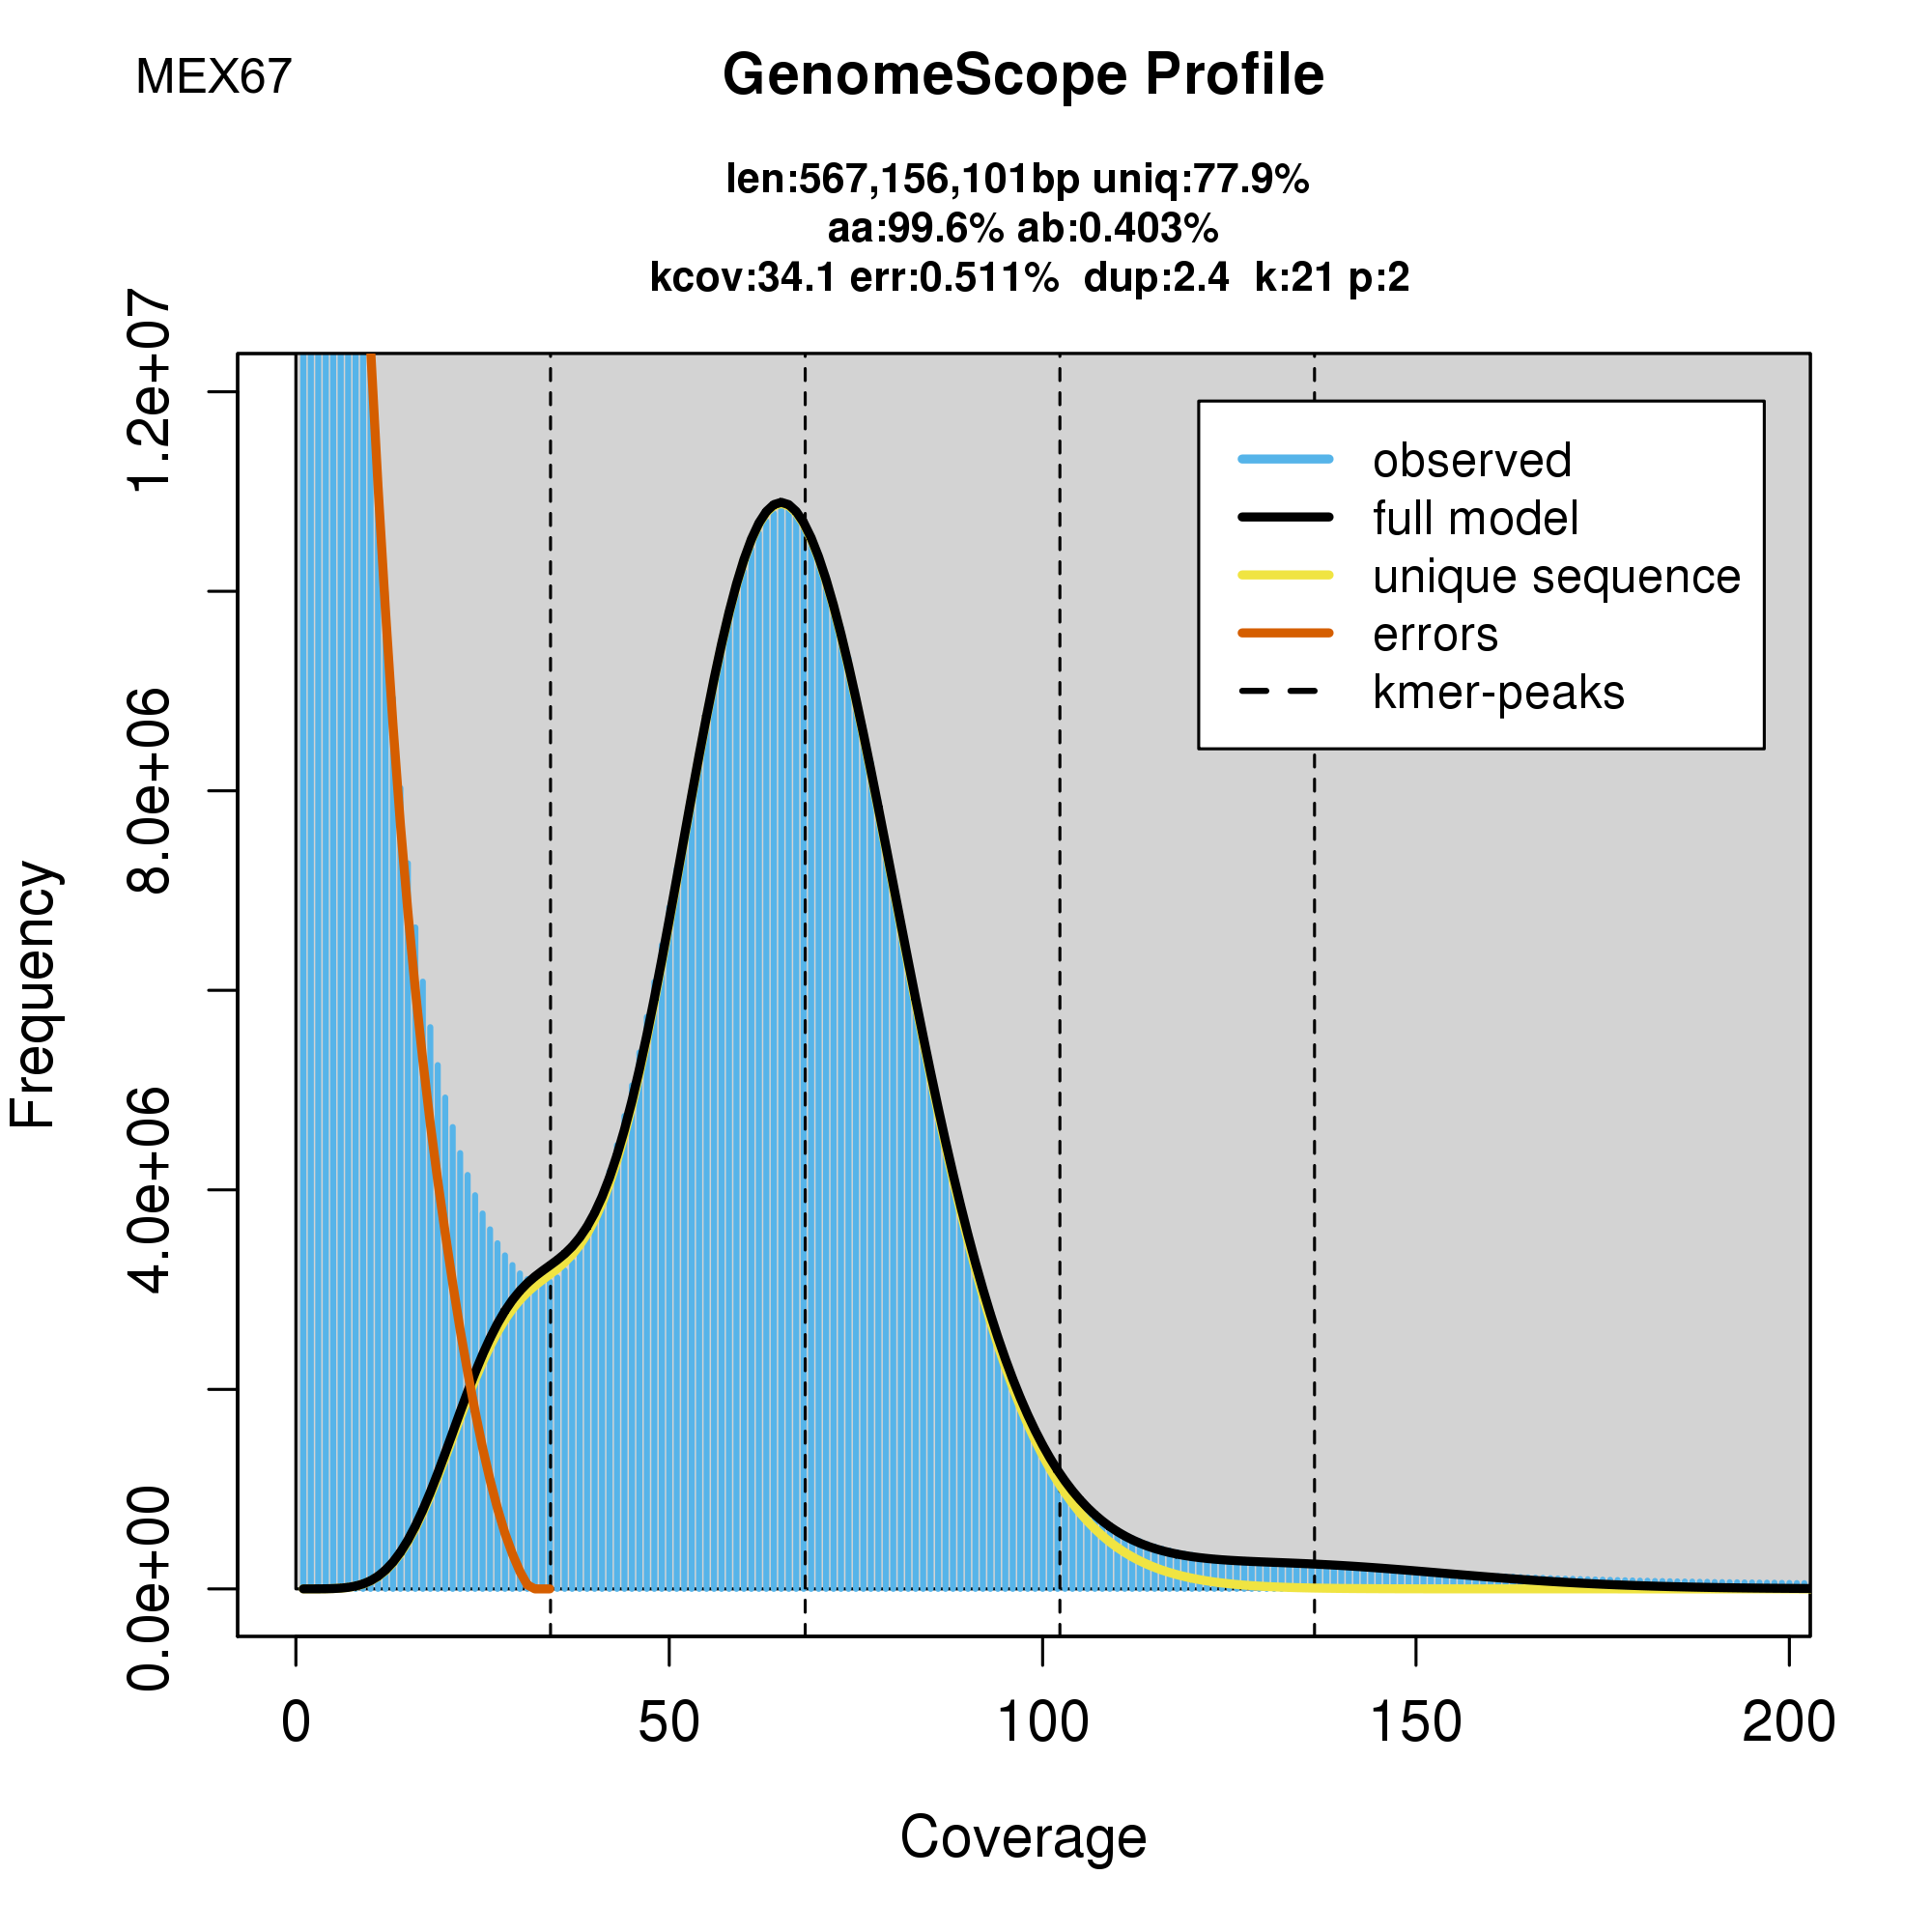 Example of a newly annotated GenomeScope output with sample ID.